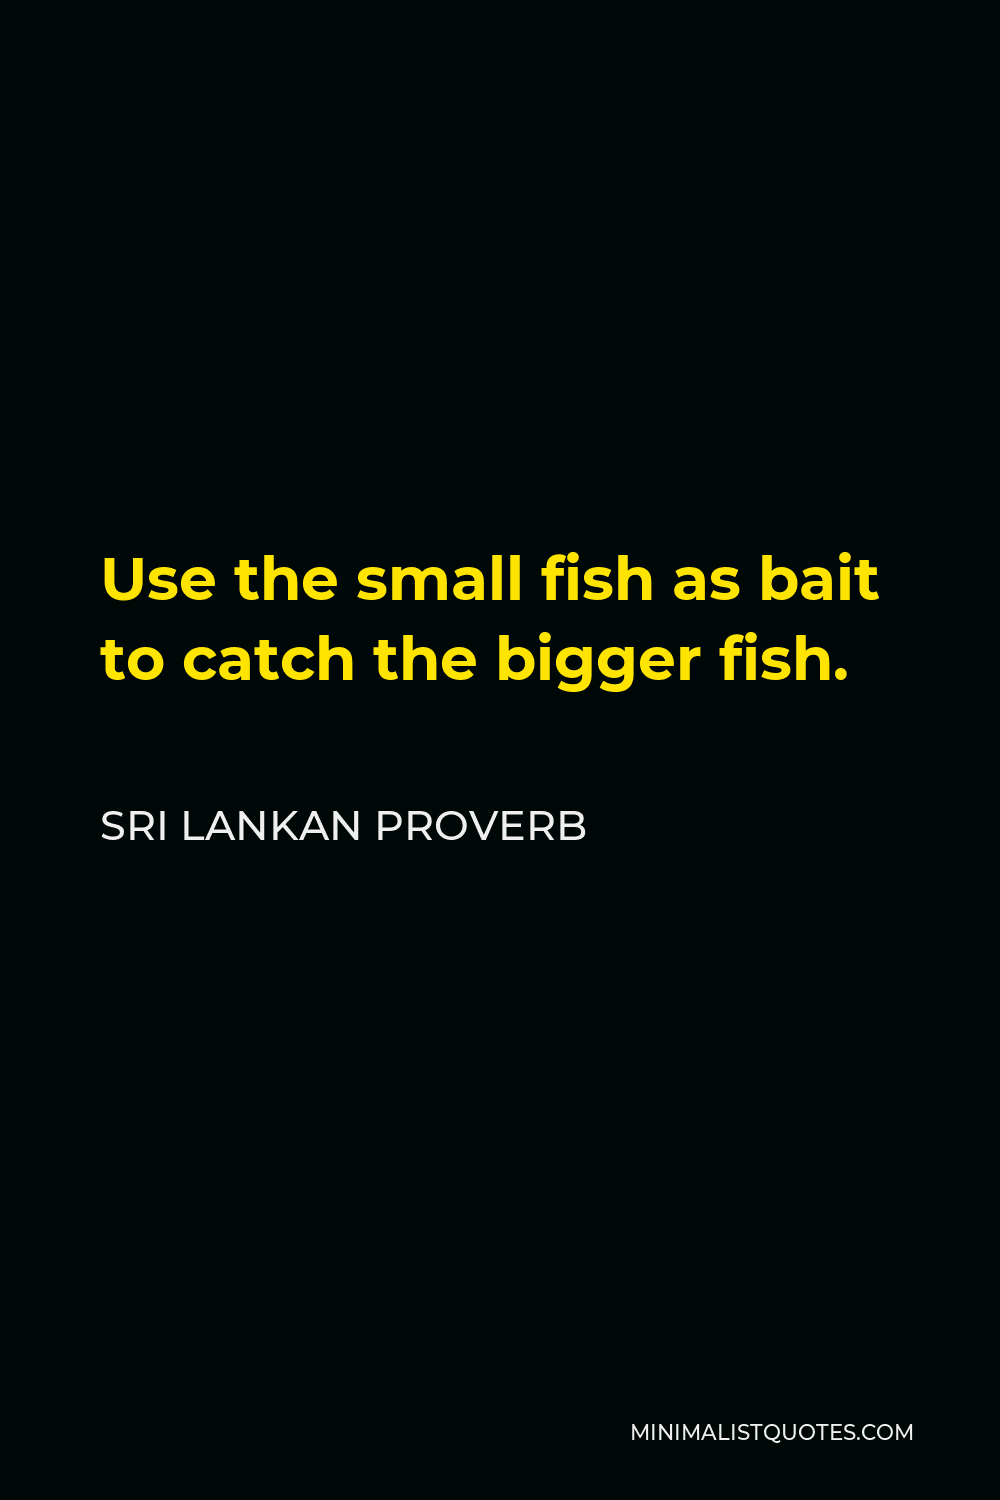 Sri Lankan Proverb Quote - Use the small fish as bait to catch the bigger fish.